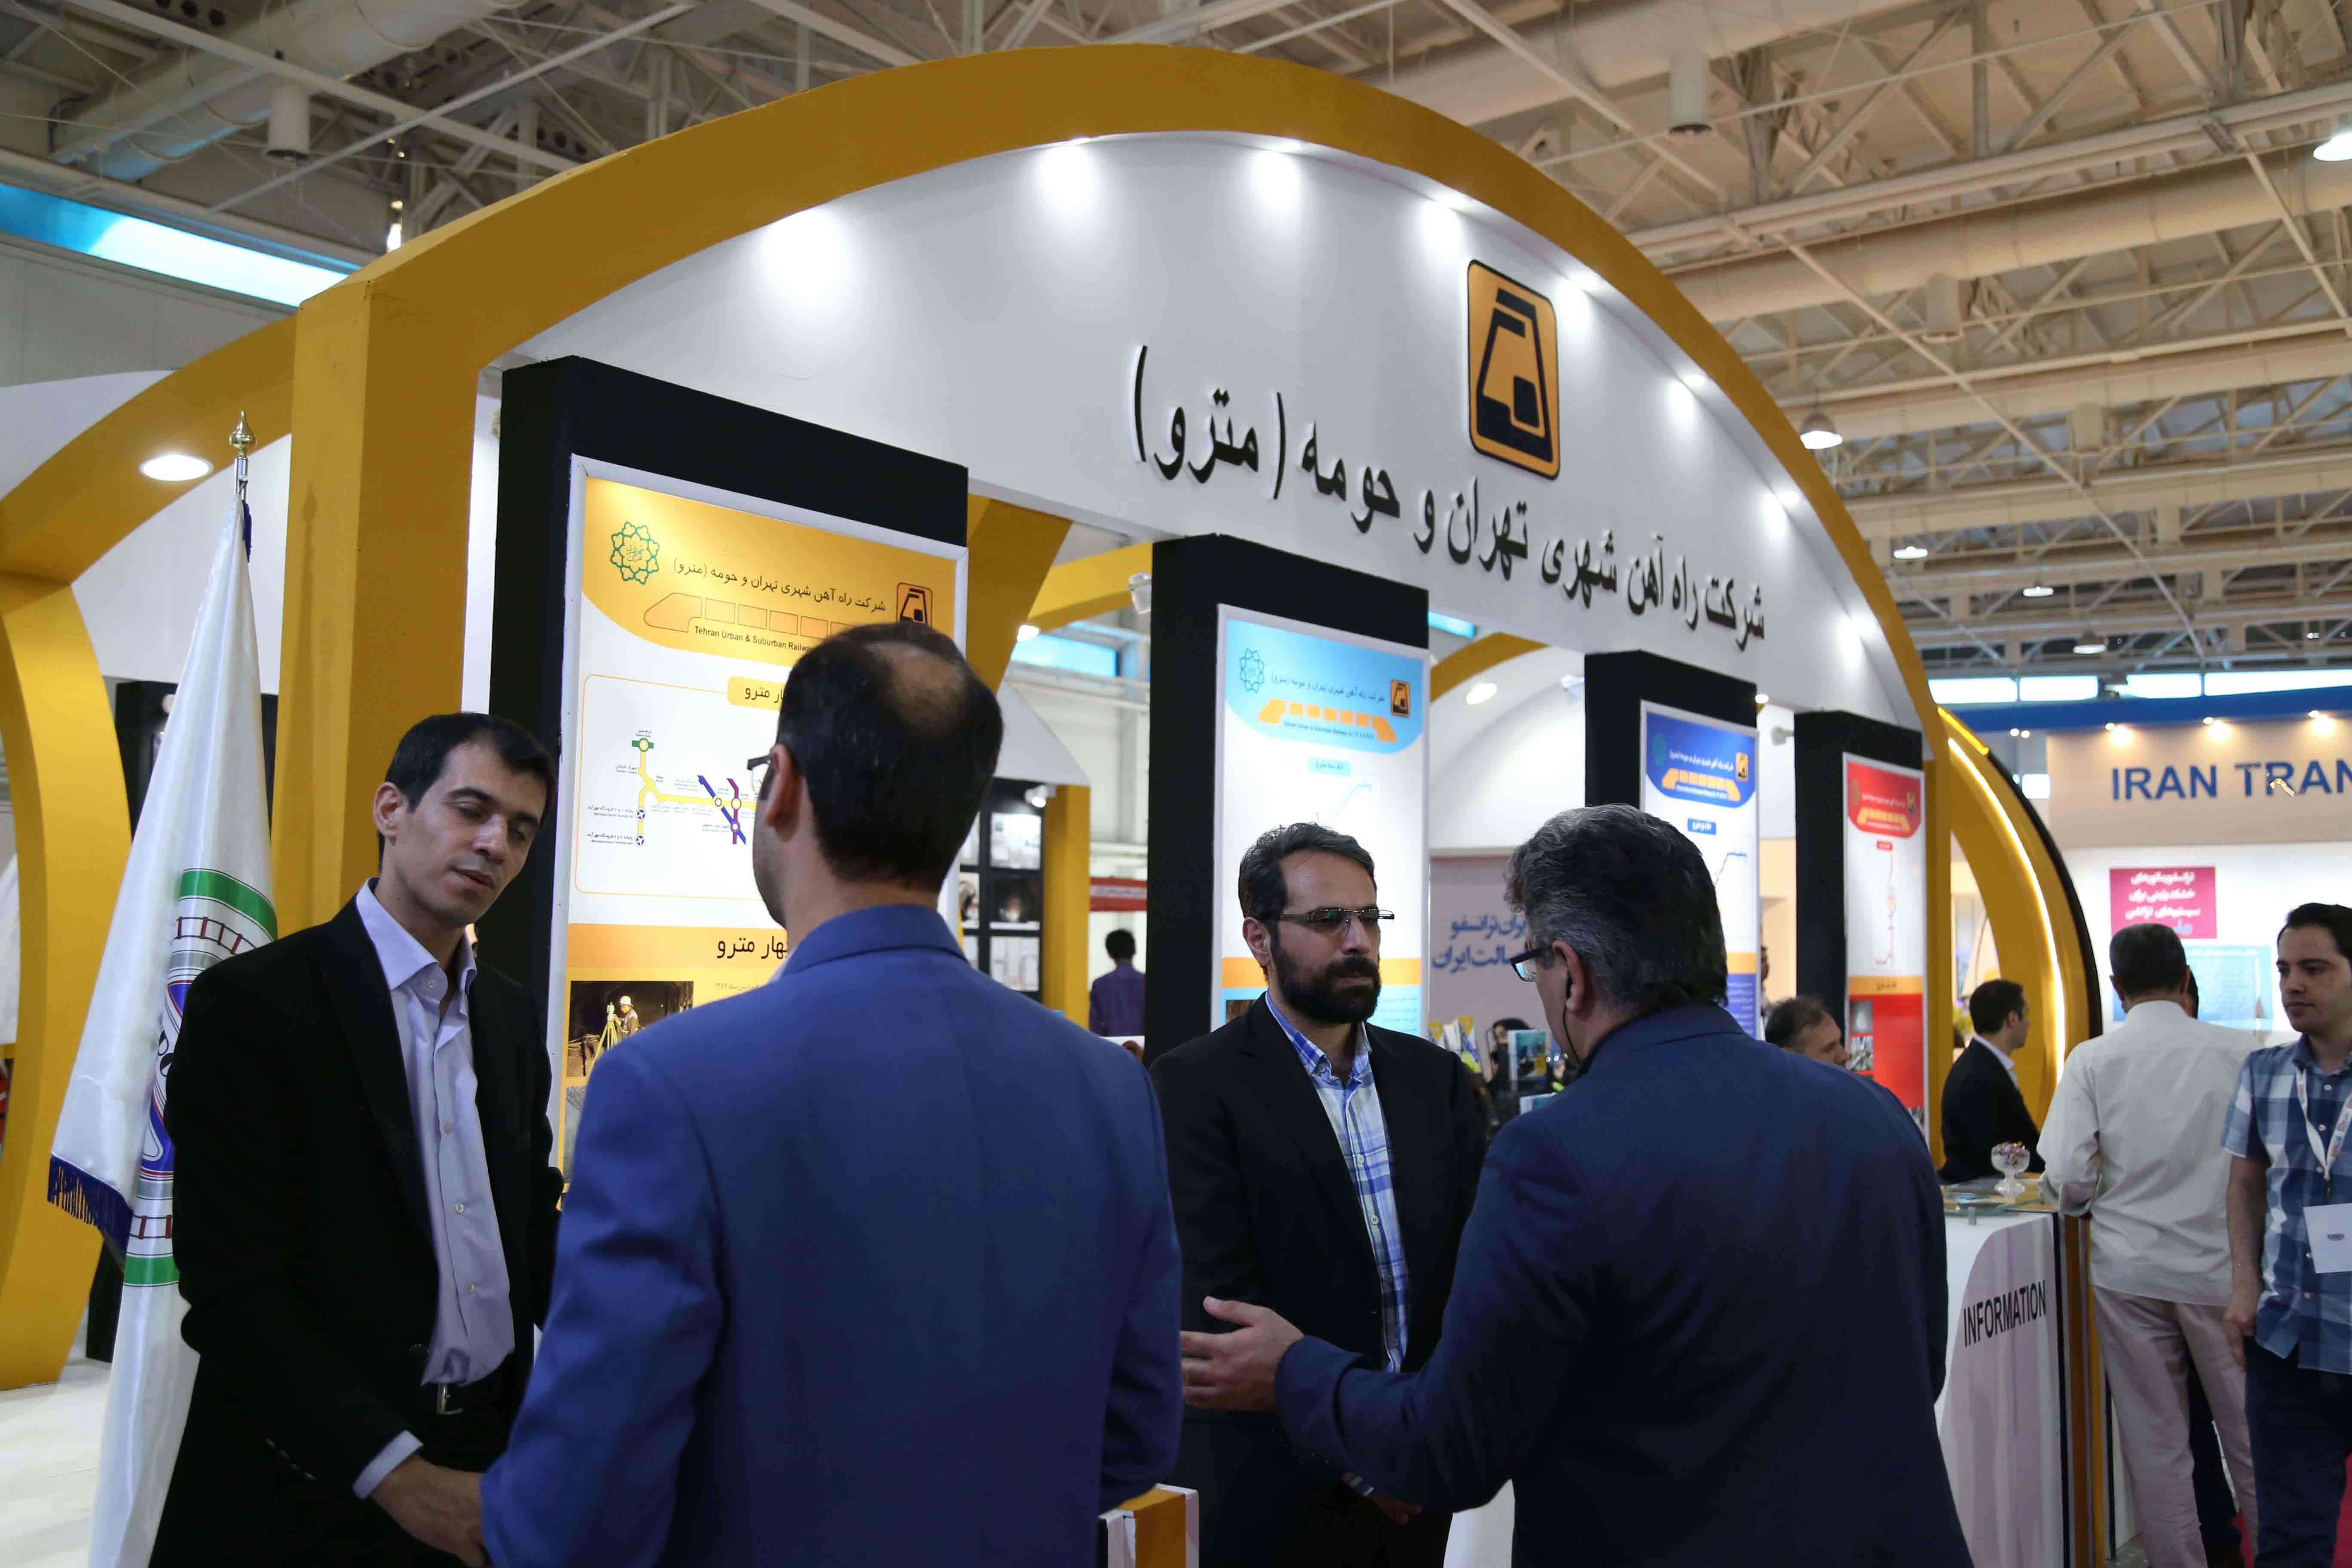 The executive role of Behro Company in the 7th International Rail Transport Exhibition